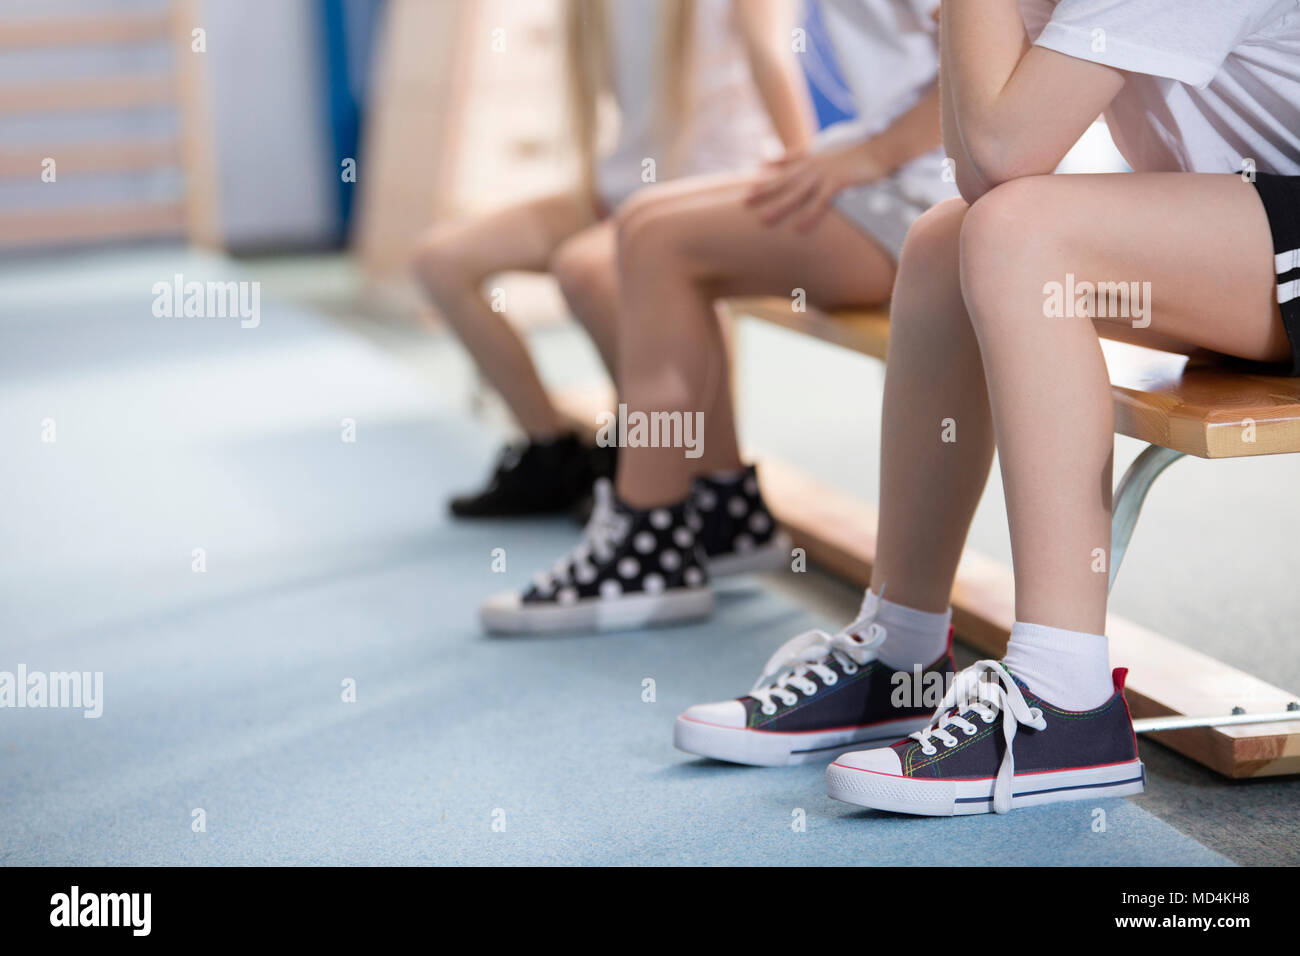 Cropped photo of children's legs in sneakers, sitting on a bench while waiting for a physical education class Stock Photo